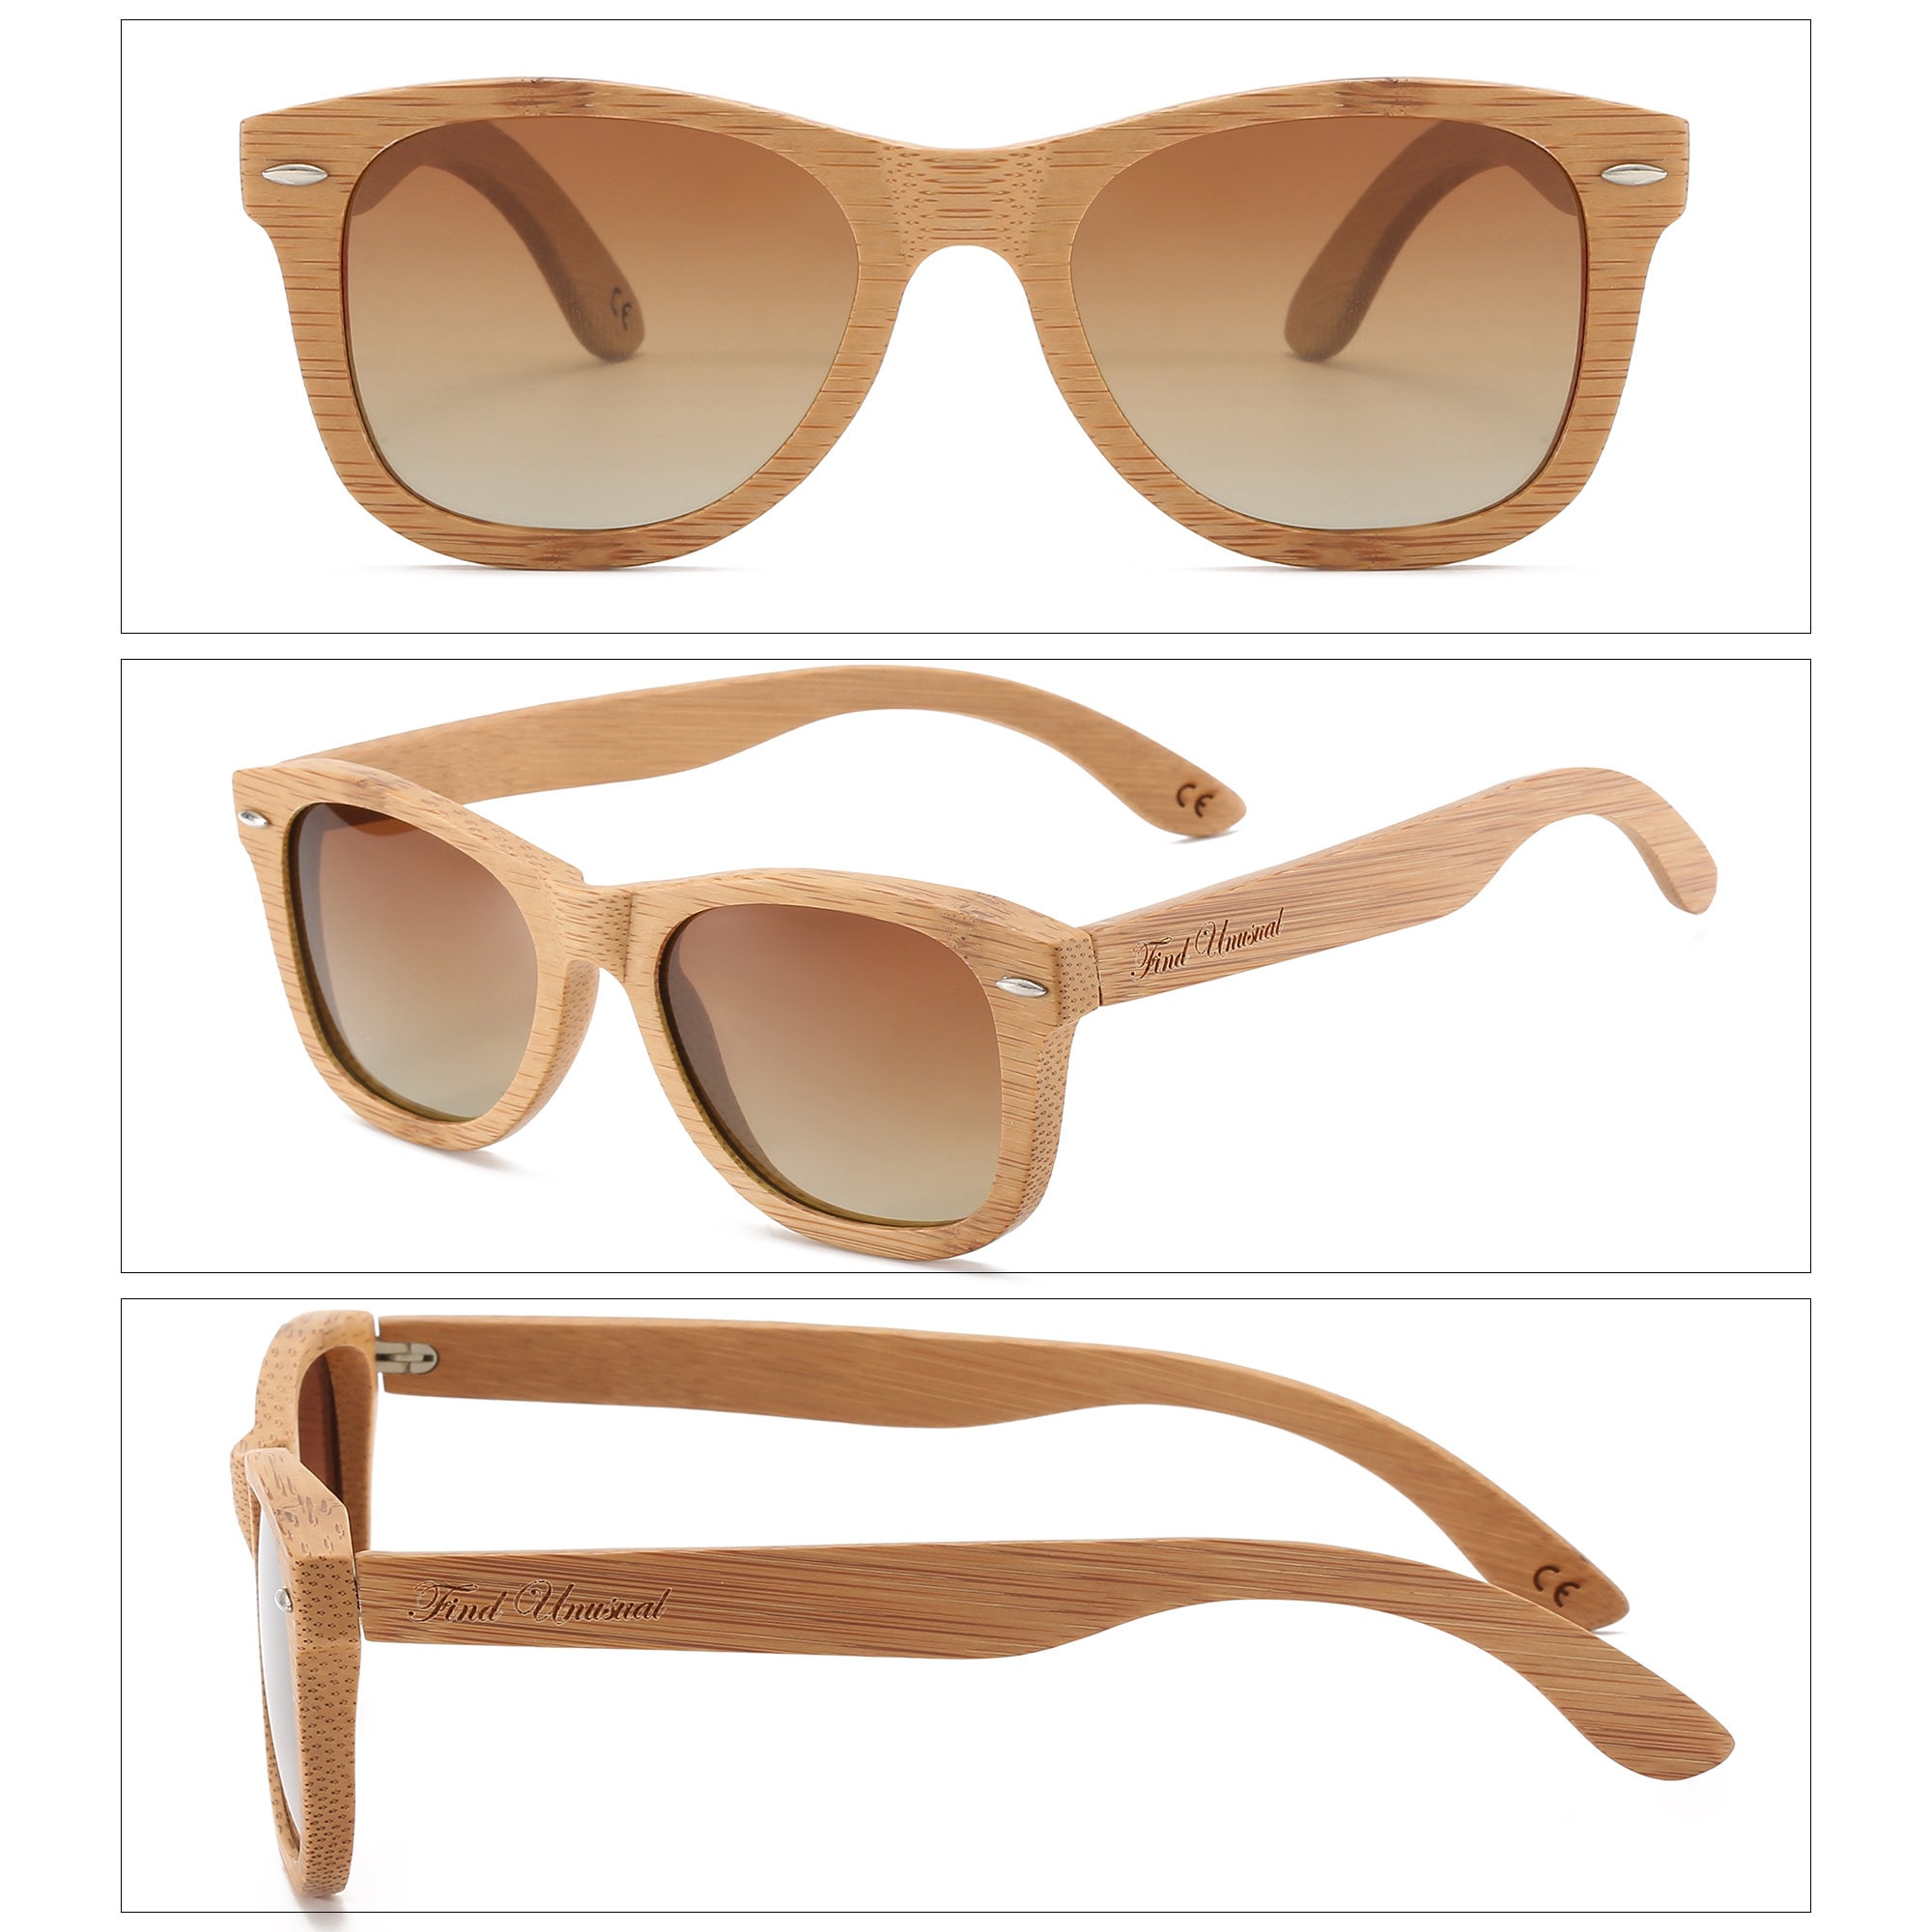 Know the bamboo glasses｜We are selling eyeglasses of natural